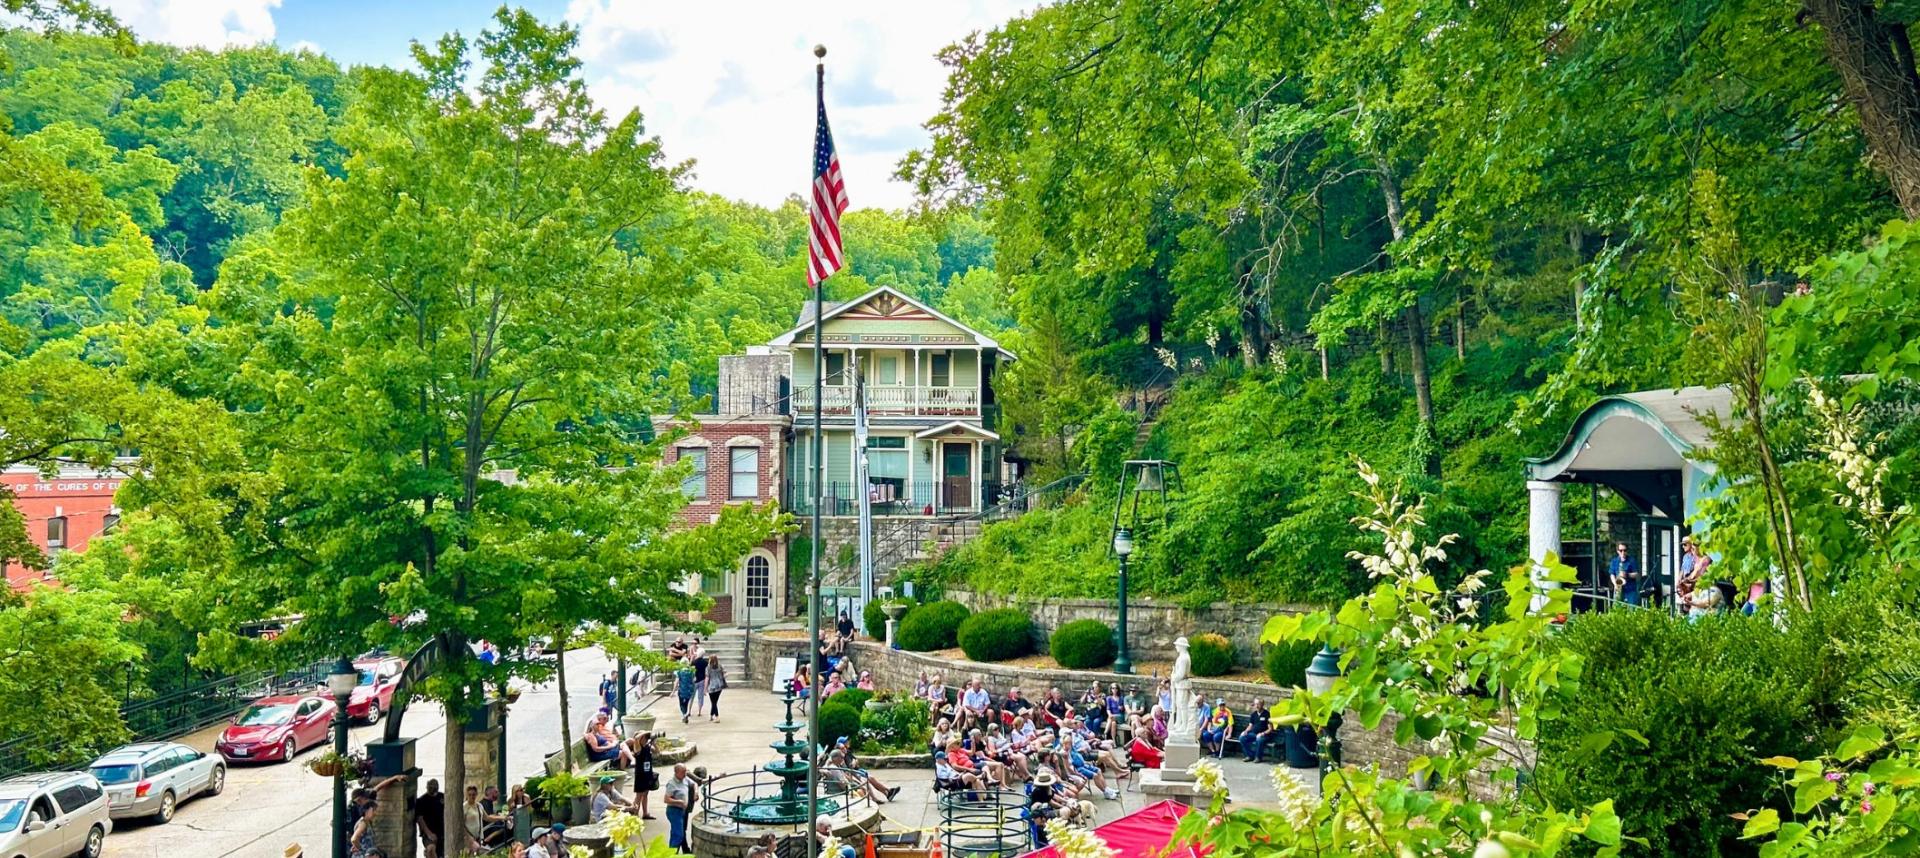 A view from street level of downtown Eureka Springs surrounded in lush green foliage.